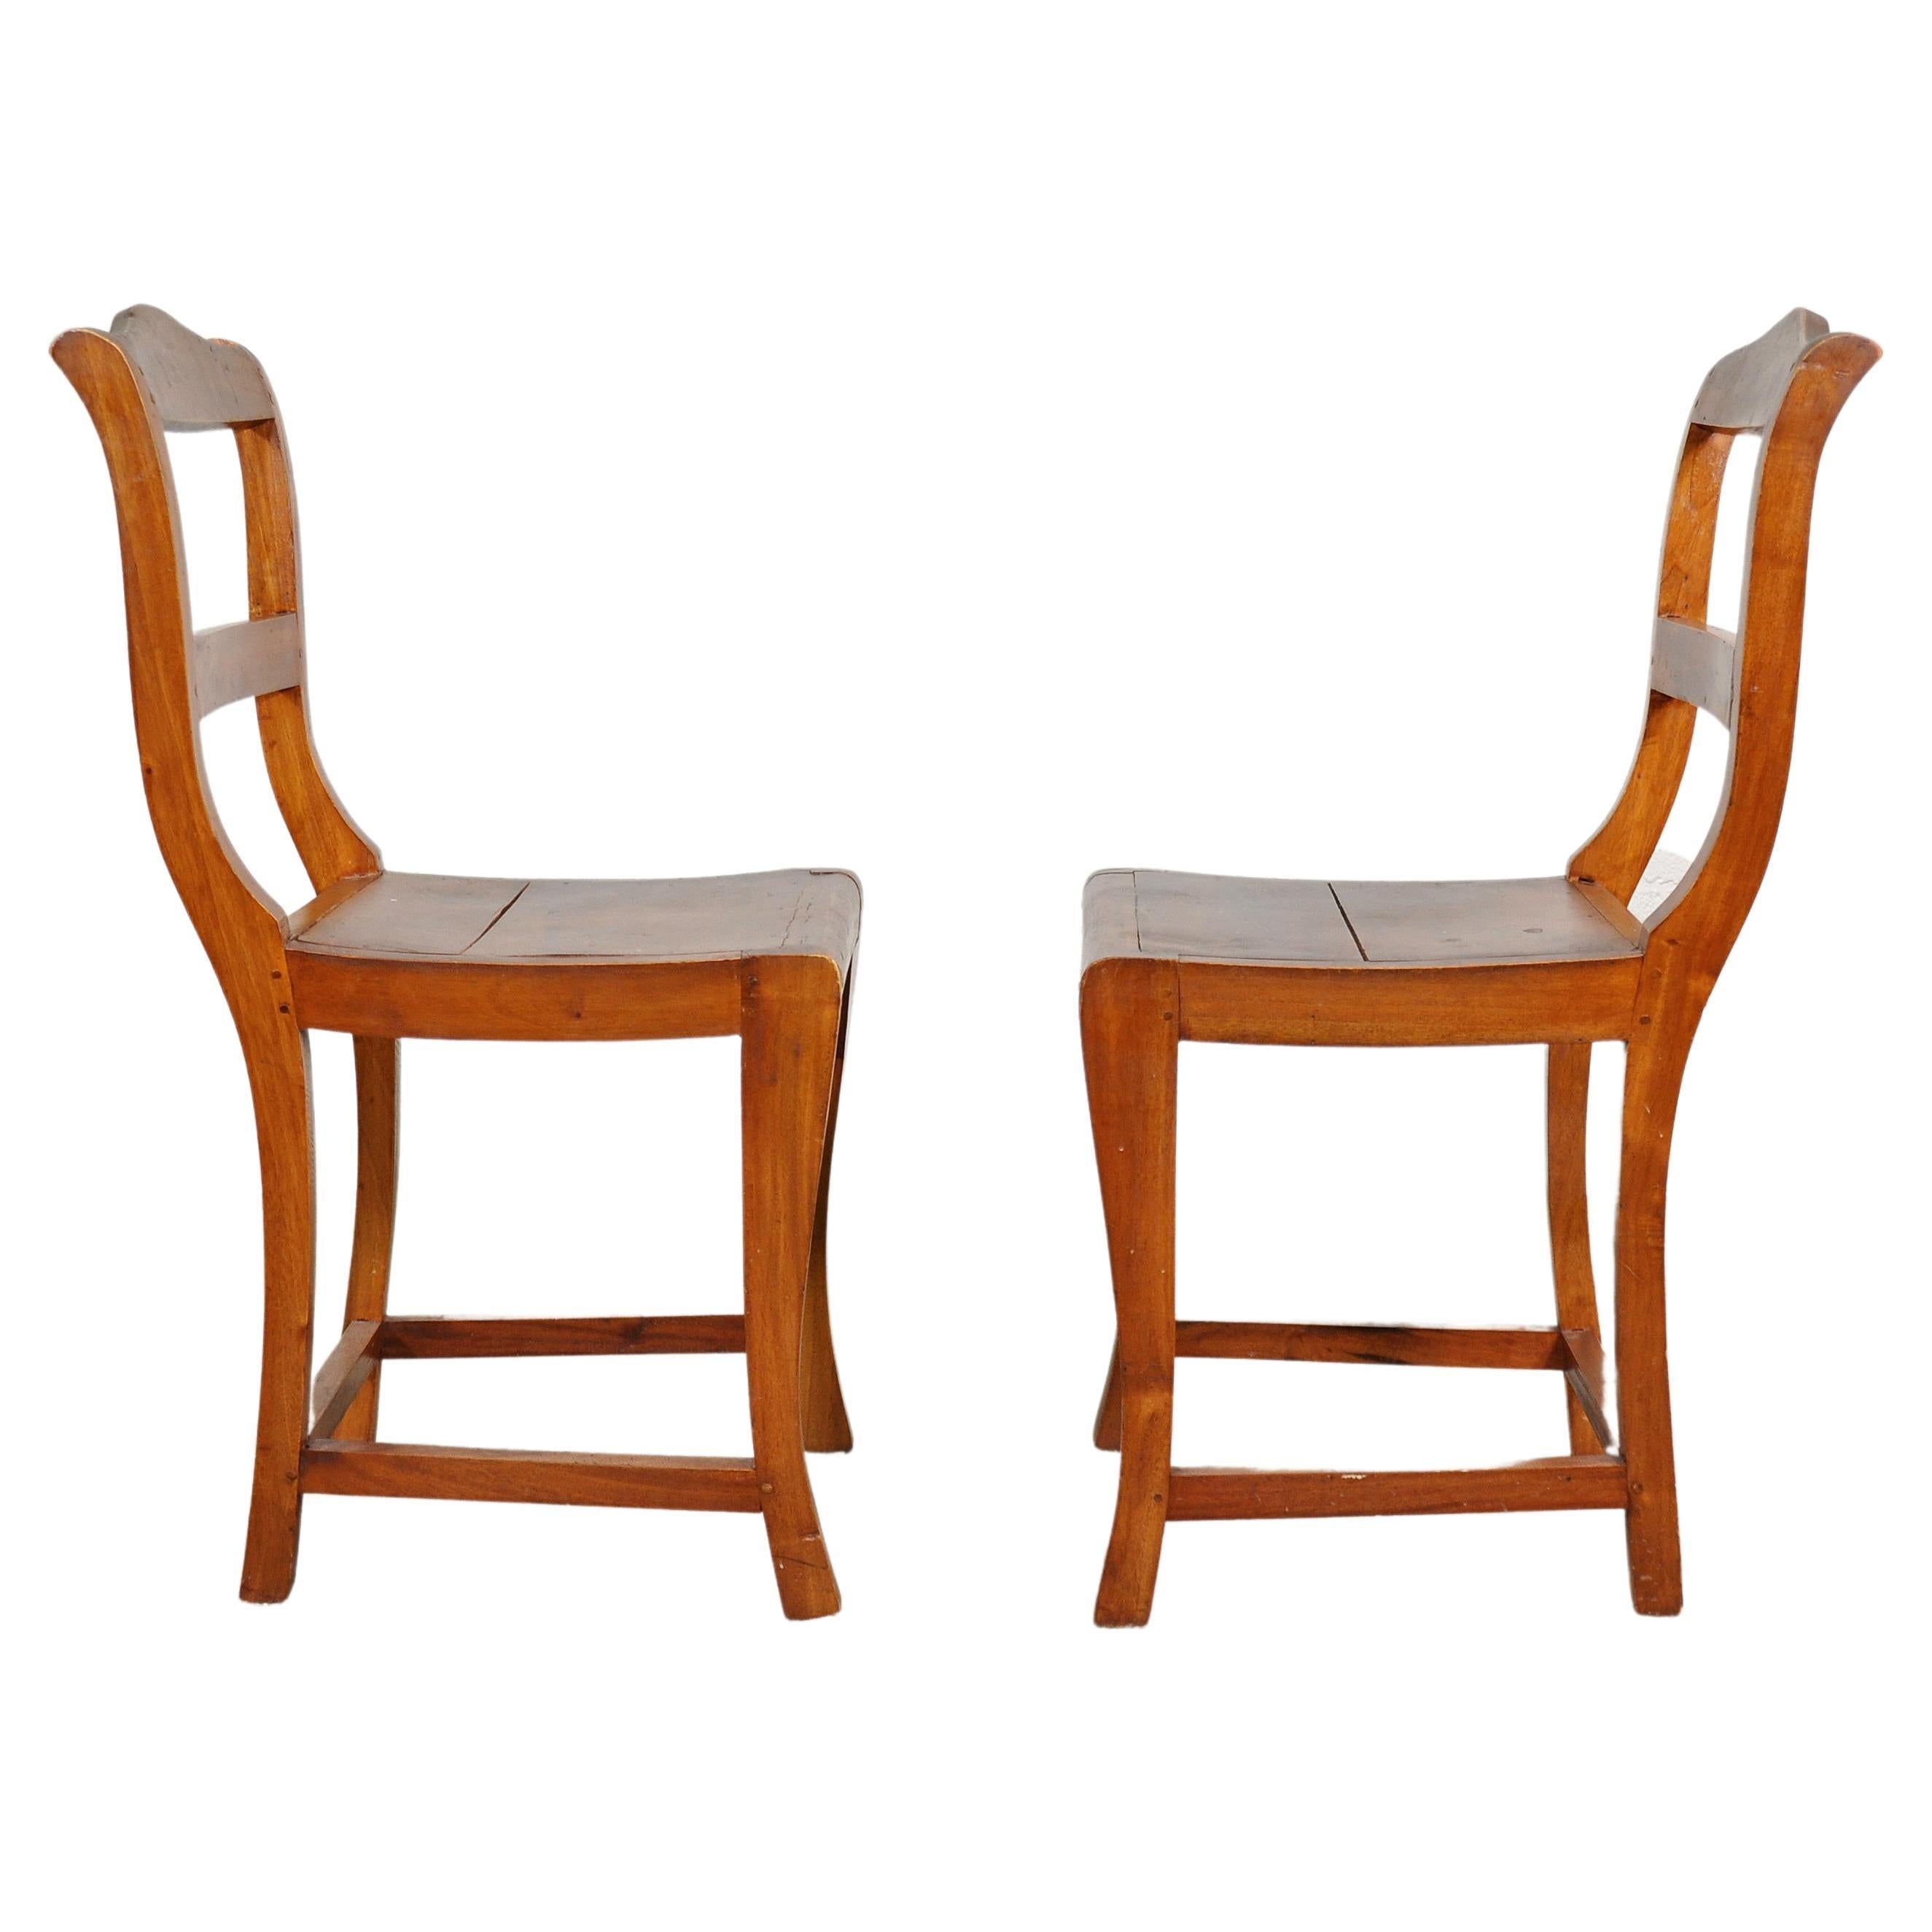 Hand-Crafted French Country Rustic Side Chairs - a Pair For Sale